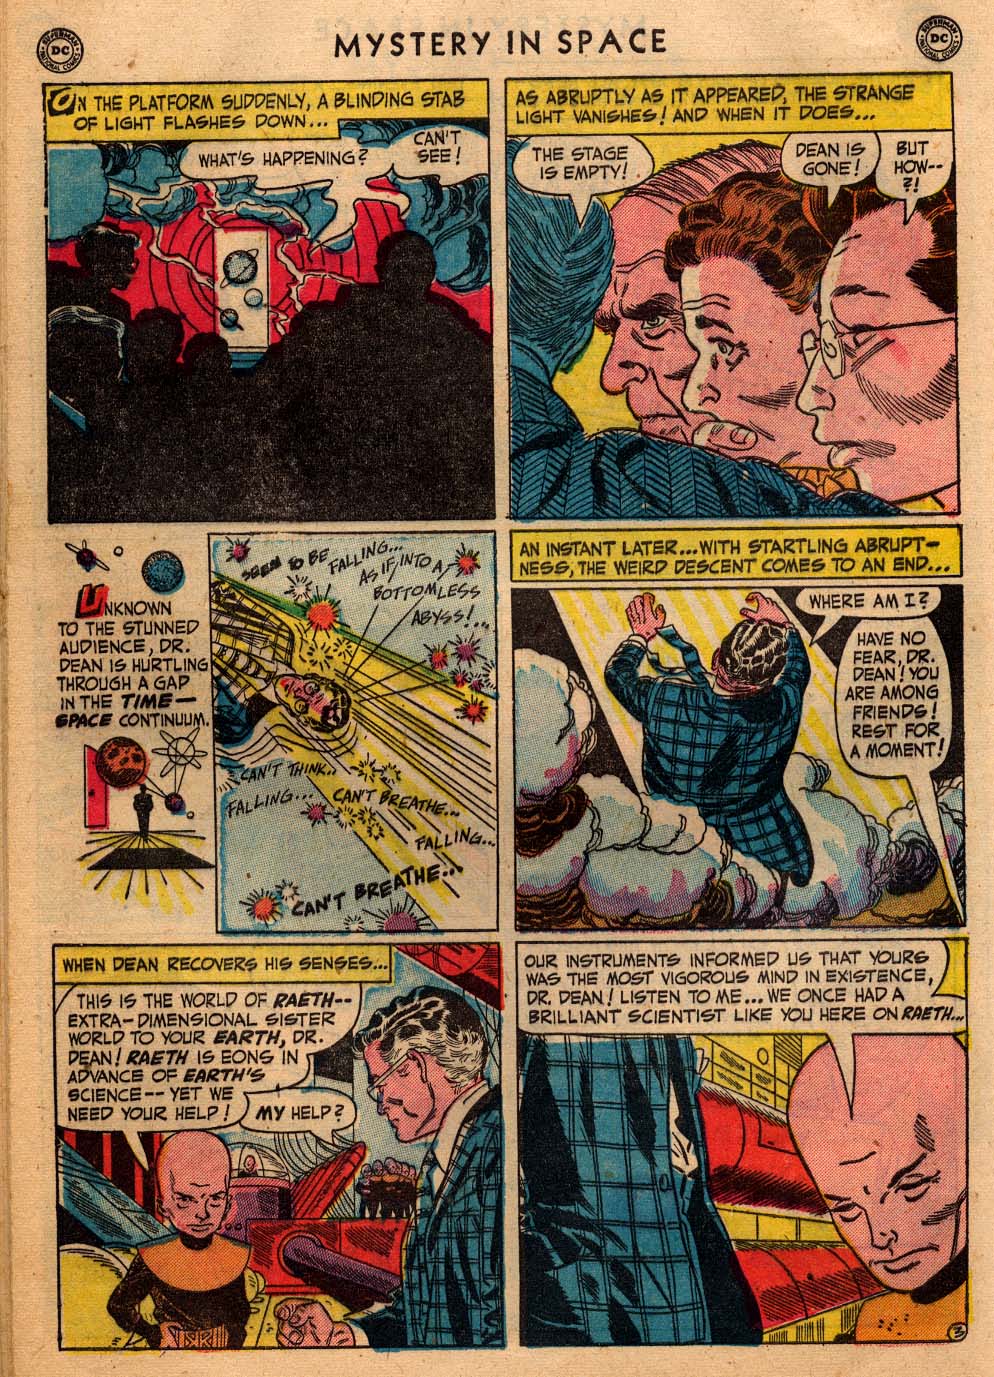 Mystery in Space (1951) 1 Page 41